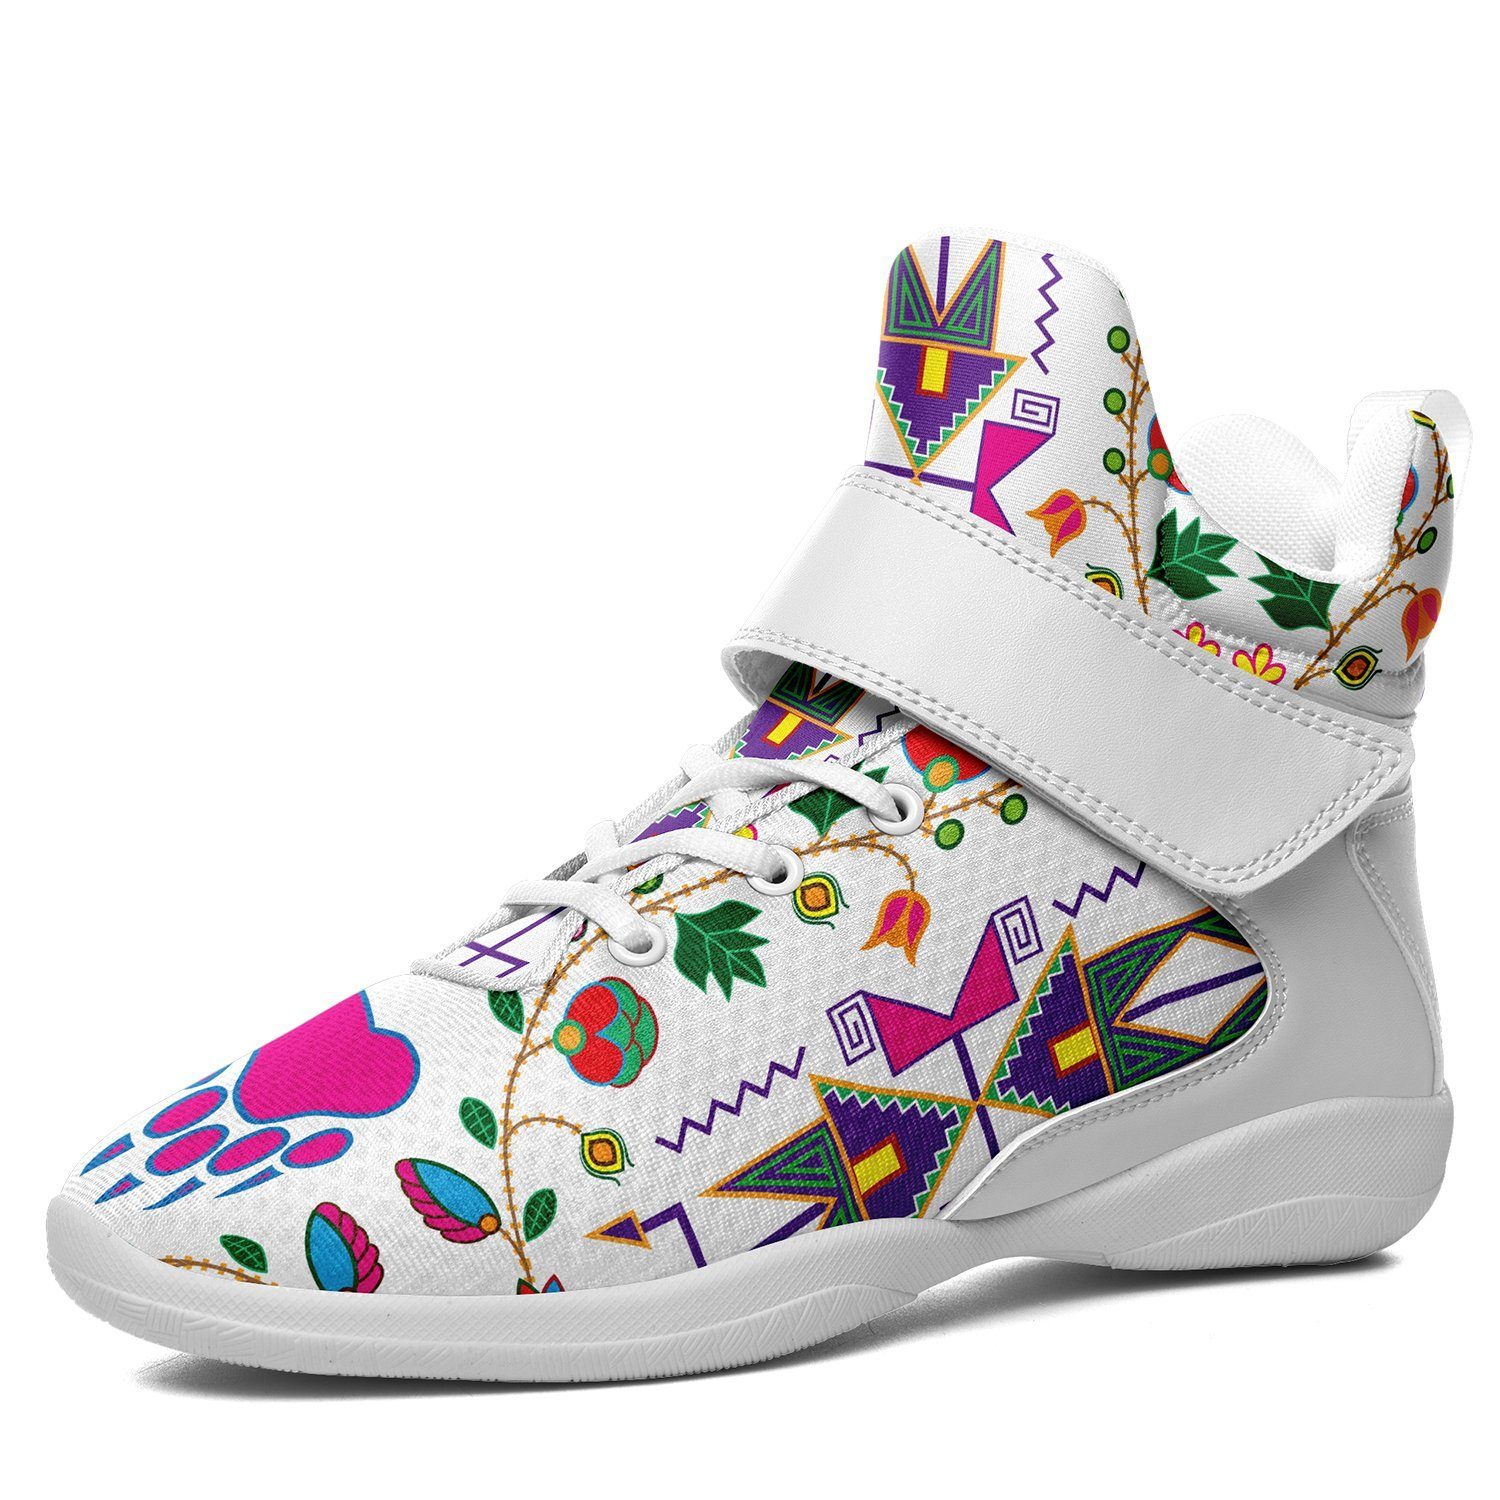 Geometric Floral Fall White Kid's Ipottaa Basketball / Sport High Top Shoes 49 Dzine US Women 4.5 / US Youth 3.5 / EUR 35 White Sole with White Strap 